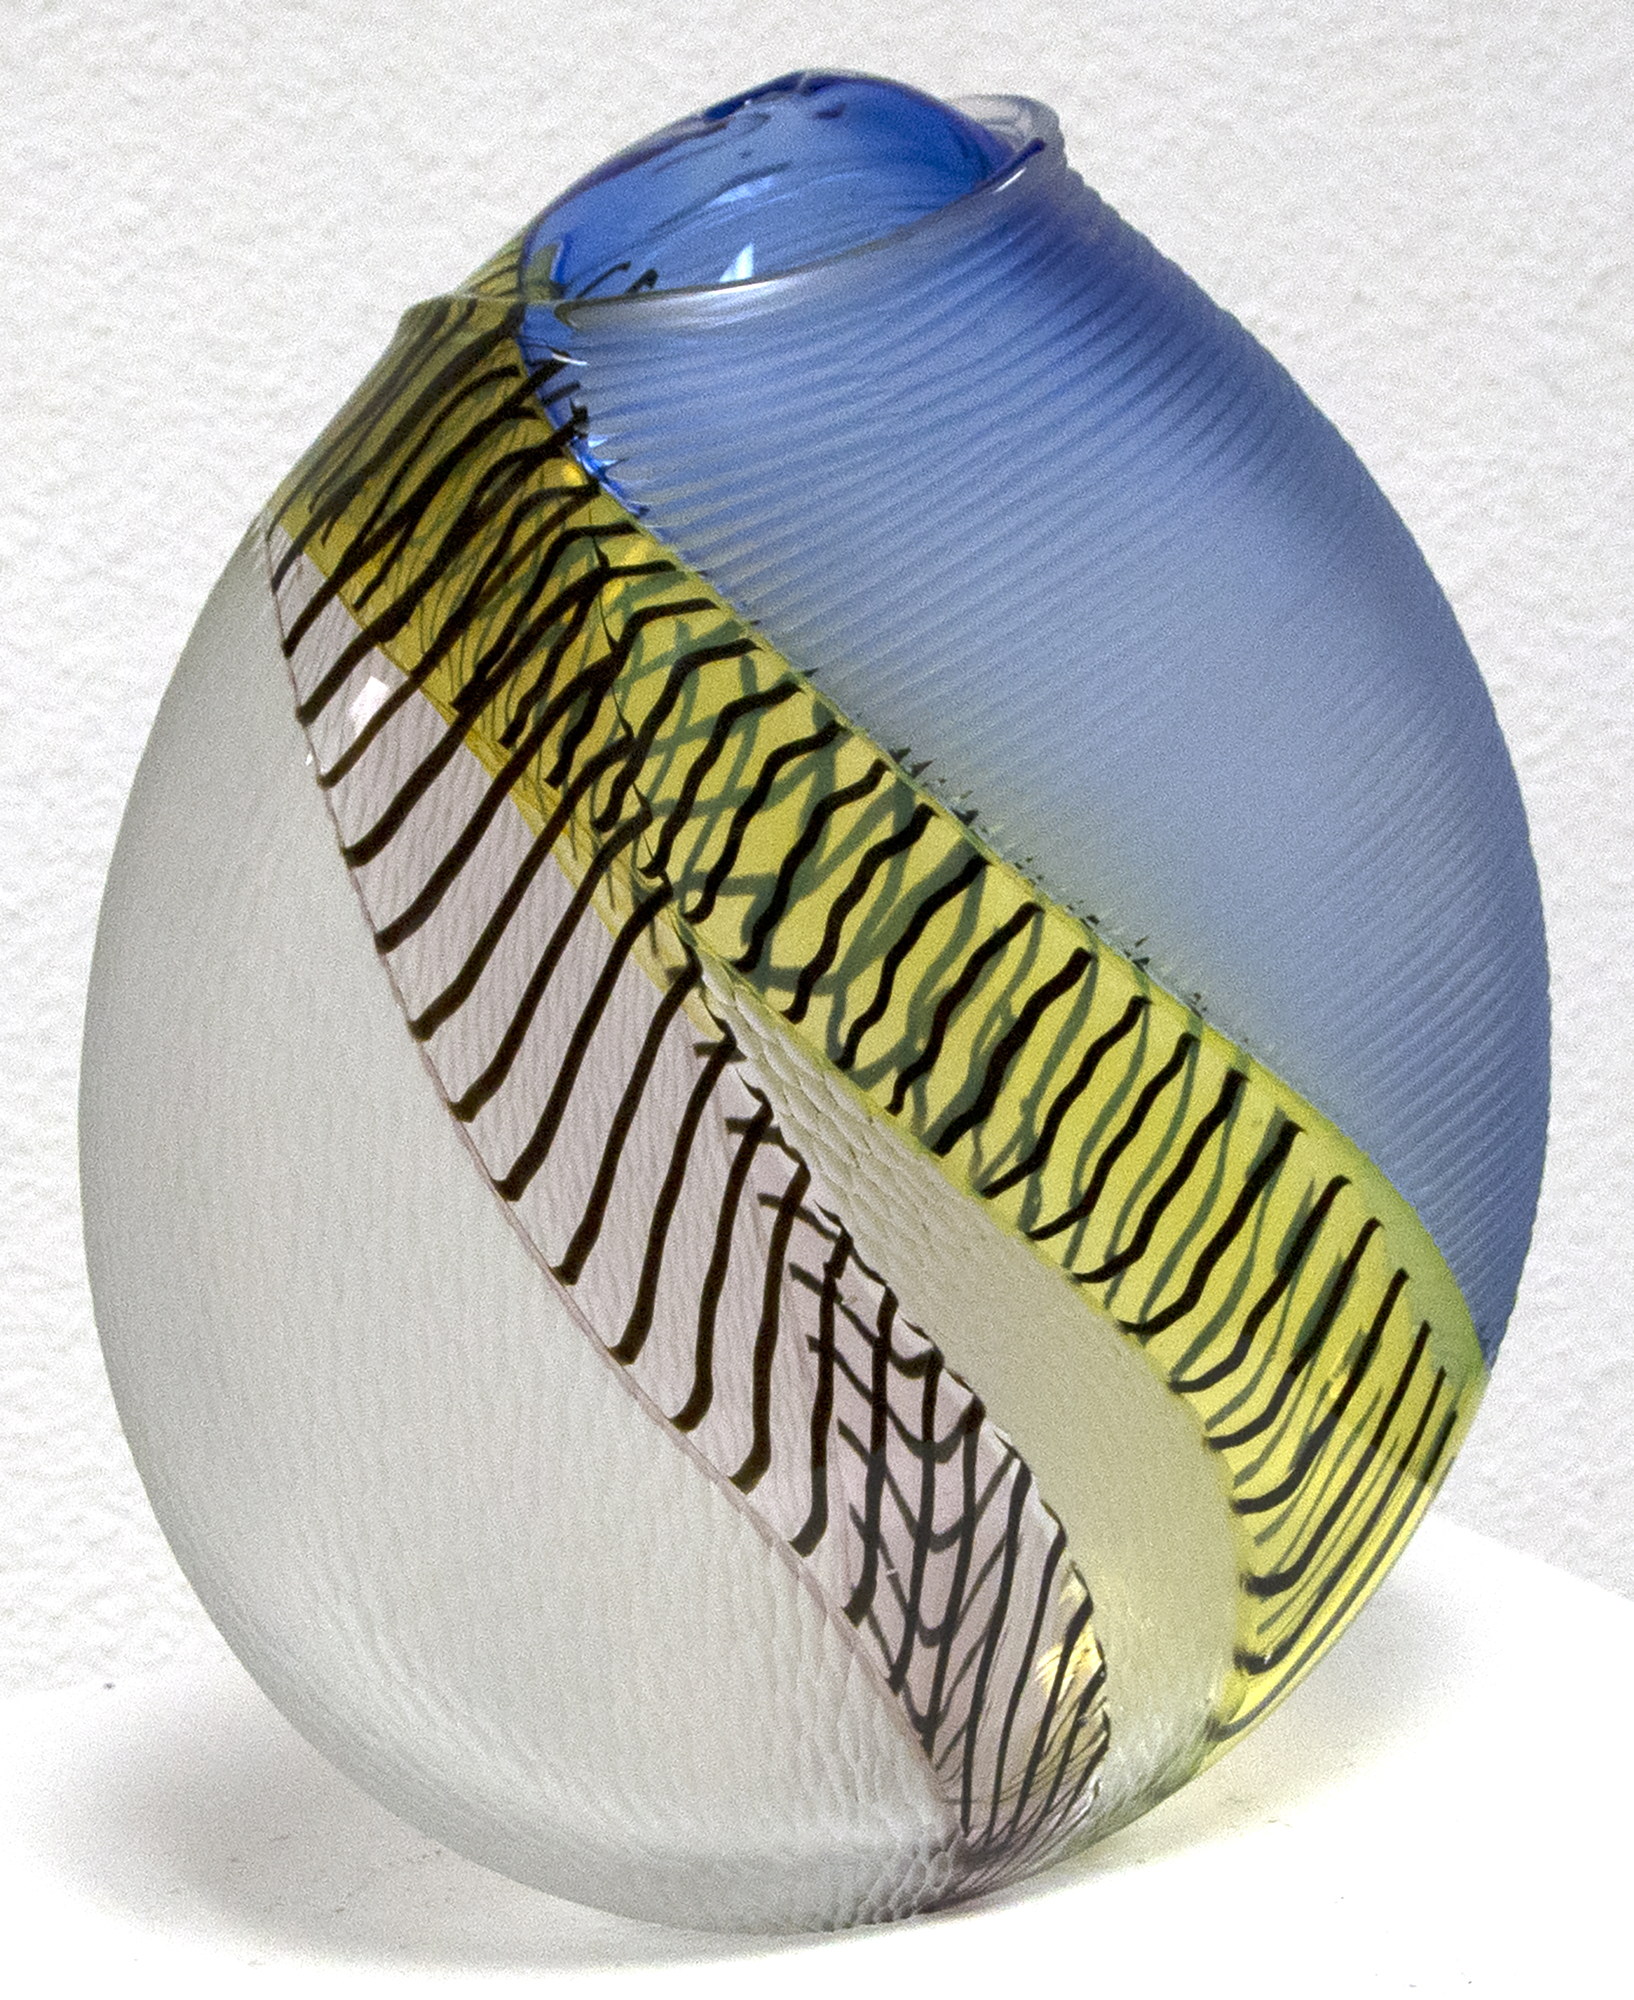 Hand blown glass with multiple incalmo of colored glass and filligrana. Switching the axel of the glass bubble and adjoining two glass bubbles with raticallo technique. Engraved partially on the surface with different patterns.&lt;br&gt;&lt;br&gt;Lino Tagliapietra, a native to Murano, is one of the world&#039;s preeminent glass artists.